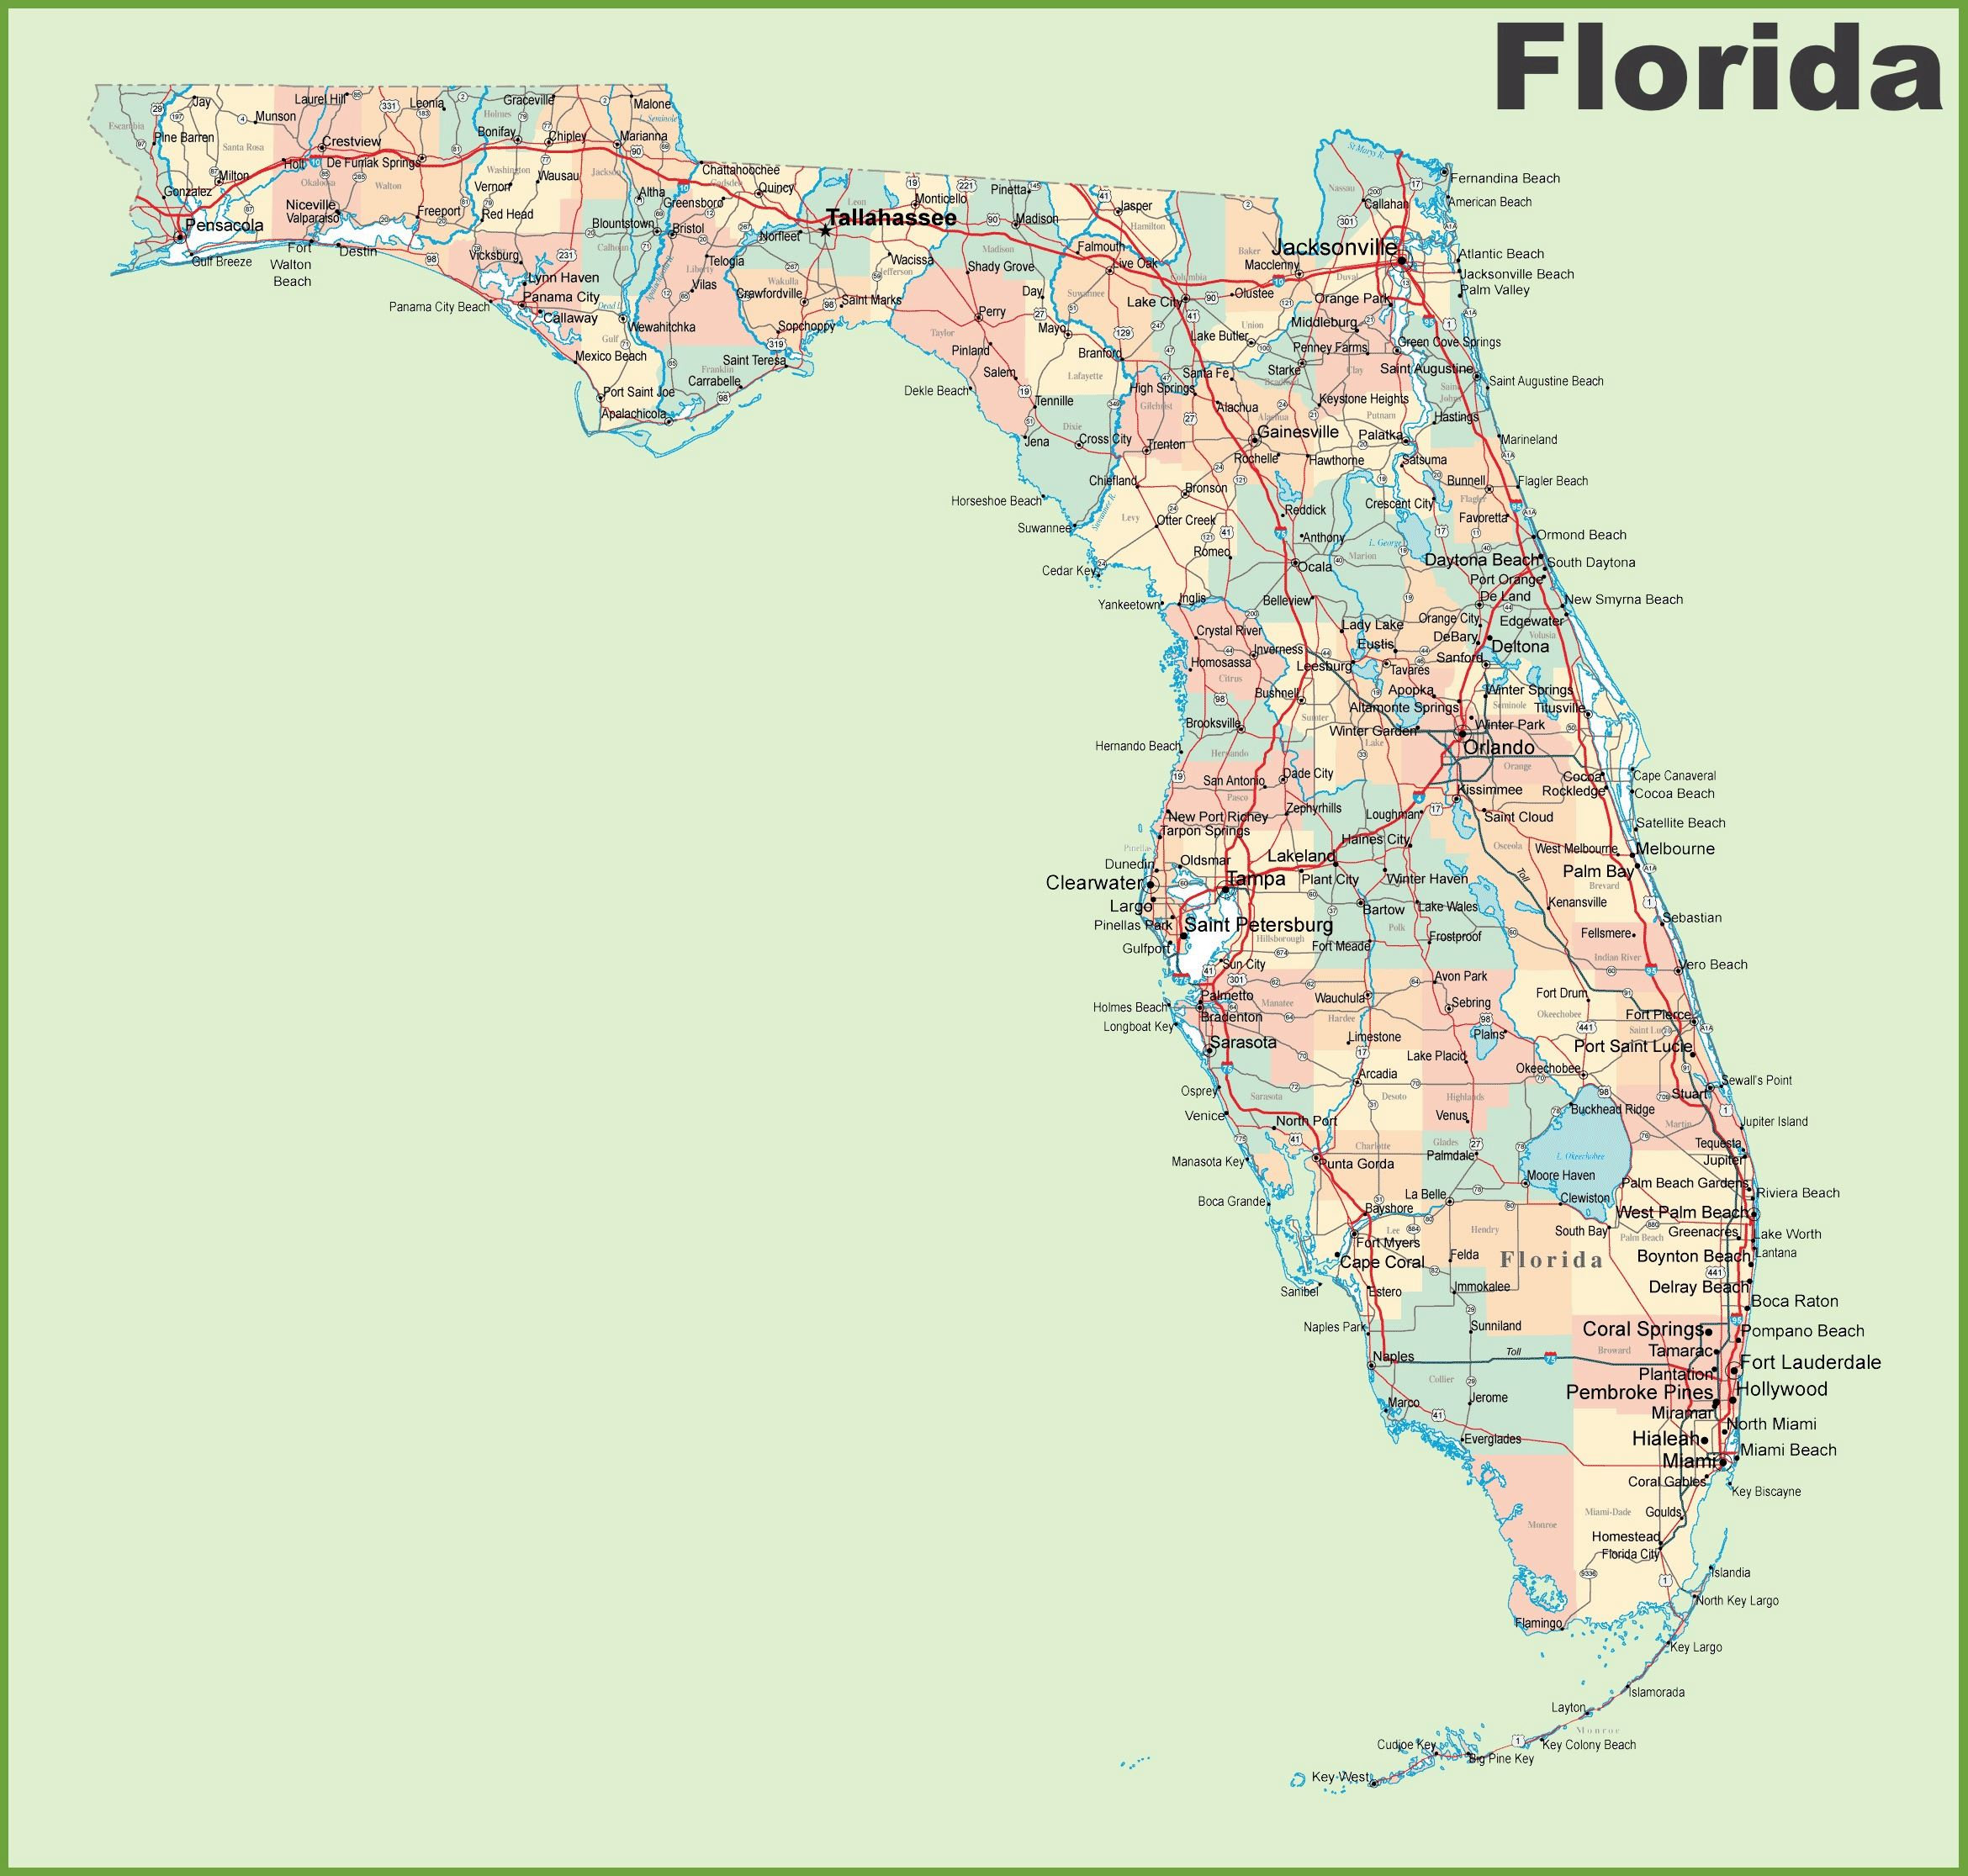 Large Florida Maps For Free Download And Print | High-Resolution And - Cassadaga Florida Map